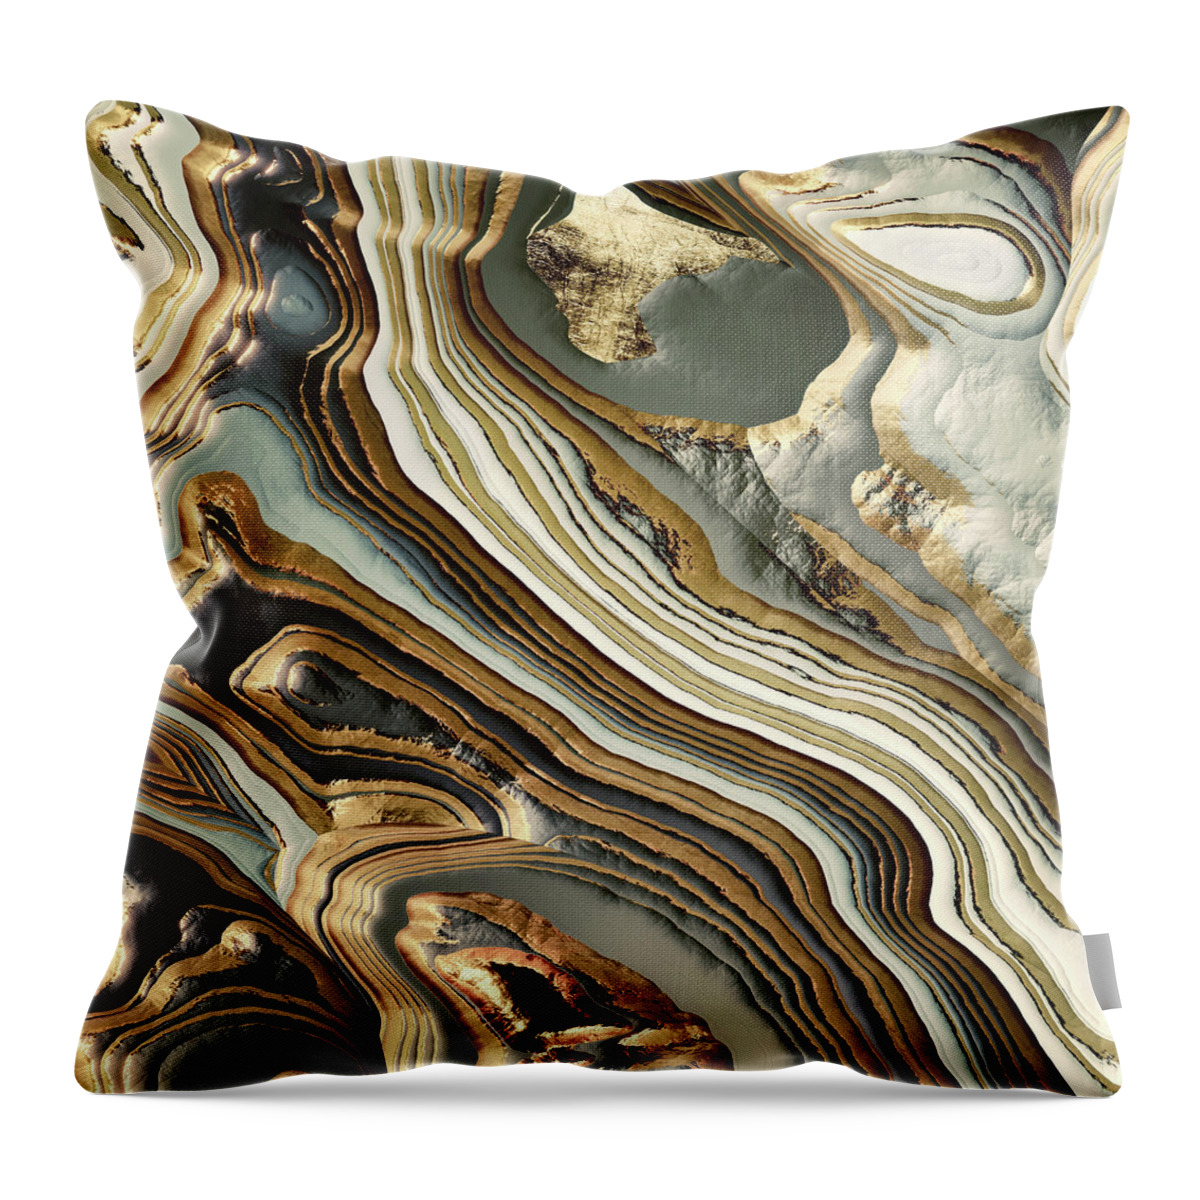 Digital Throw Pillow featuring the digital art White Gold Agate Abstract by Spacefrog Designs